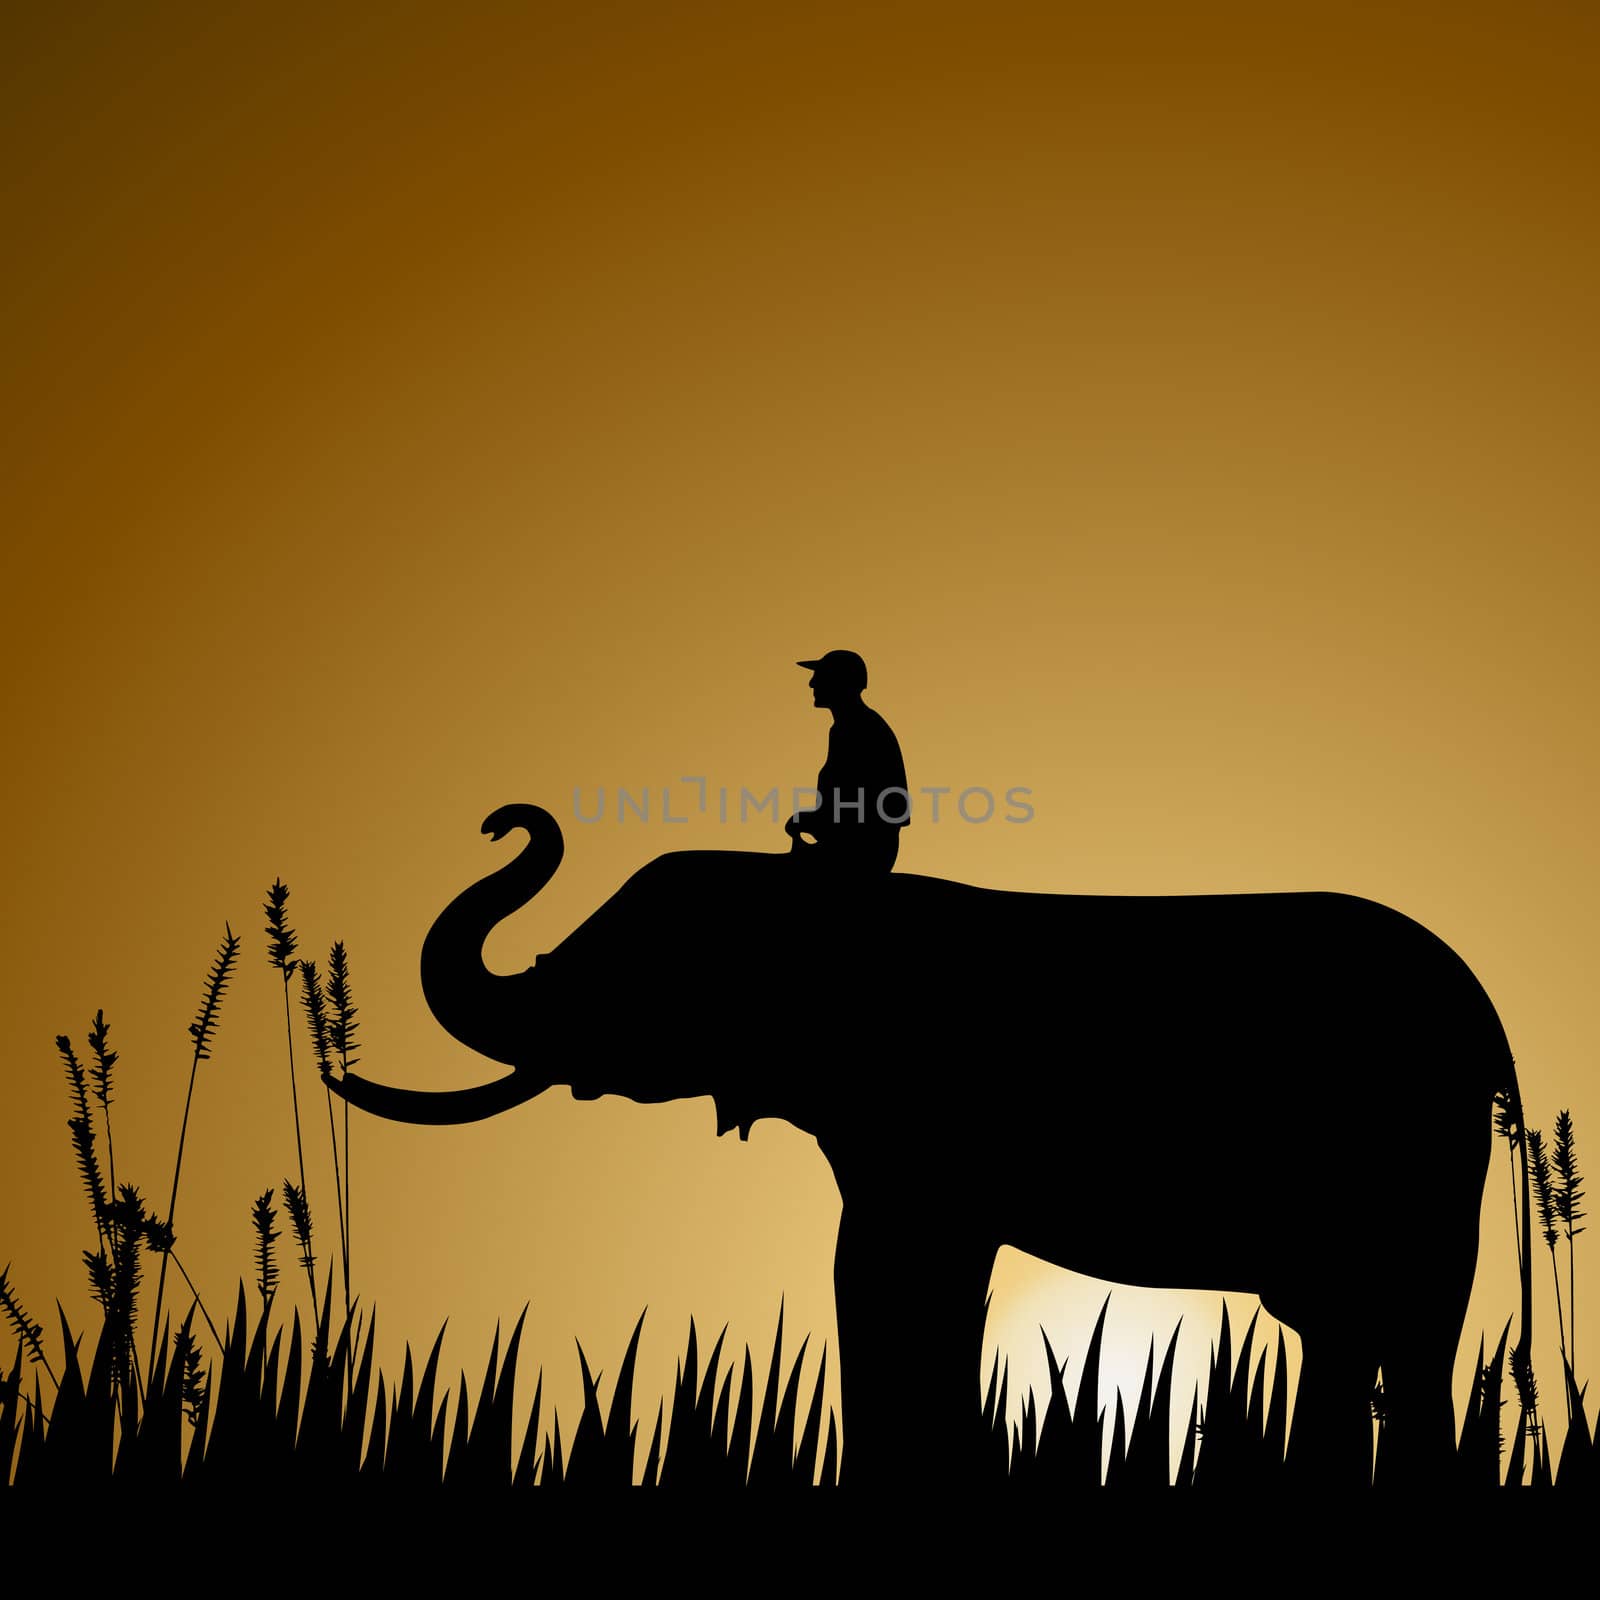 silhouette of an elephant with human, wildlife by abhishek4383